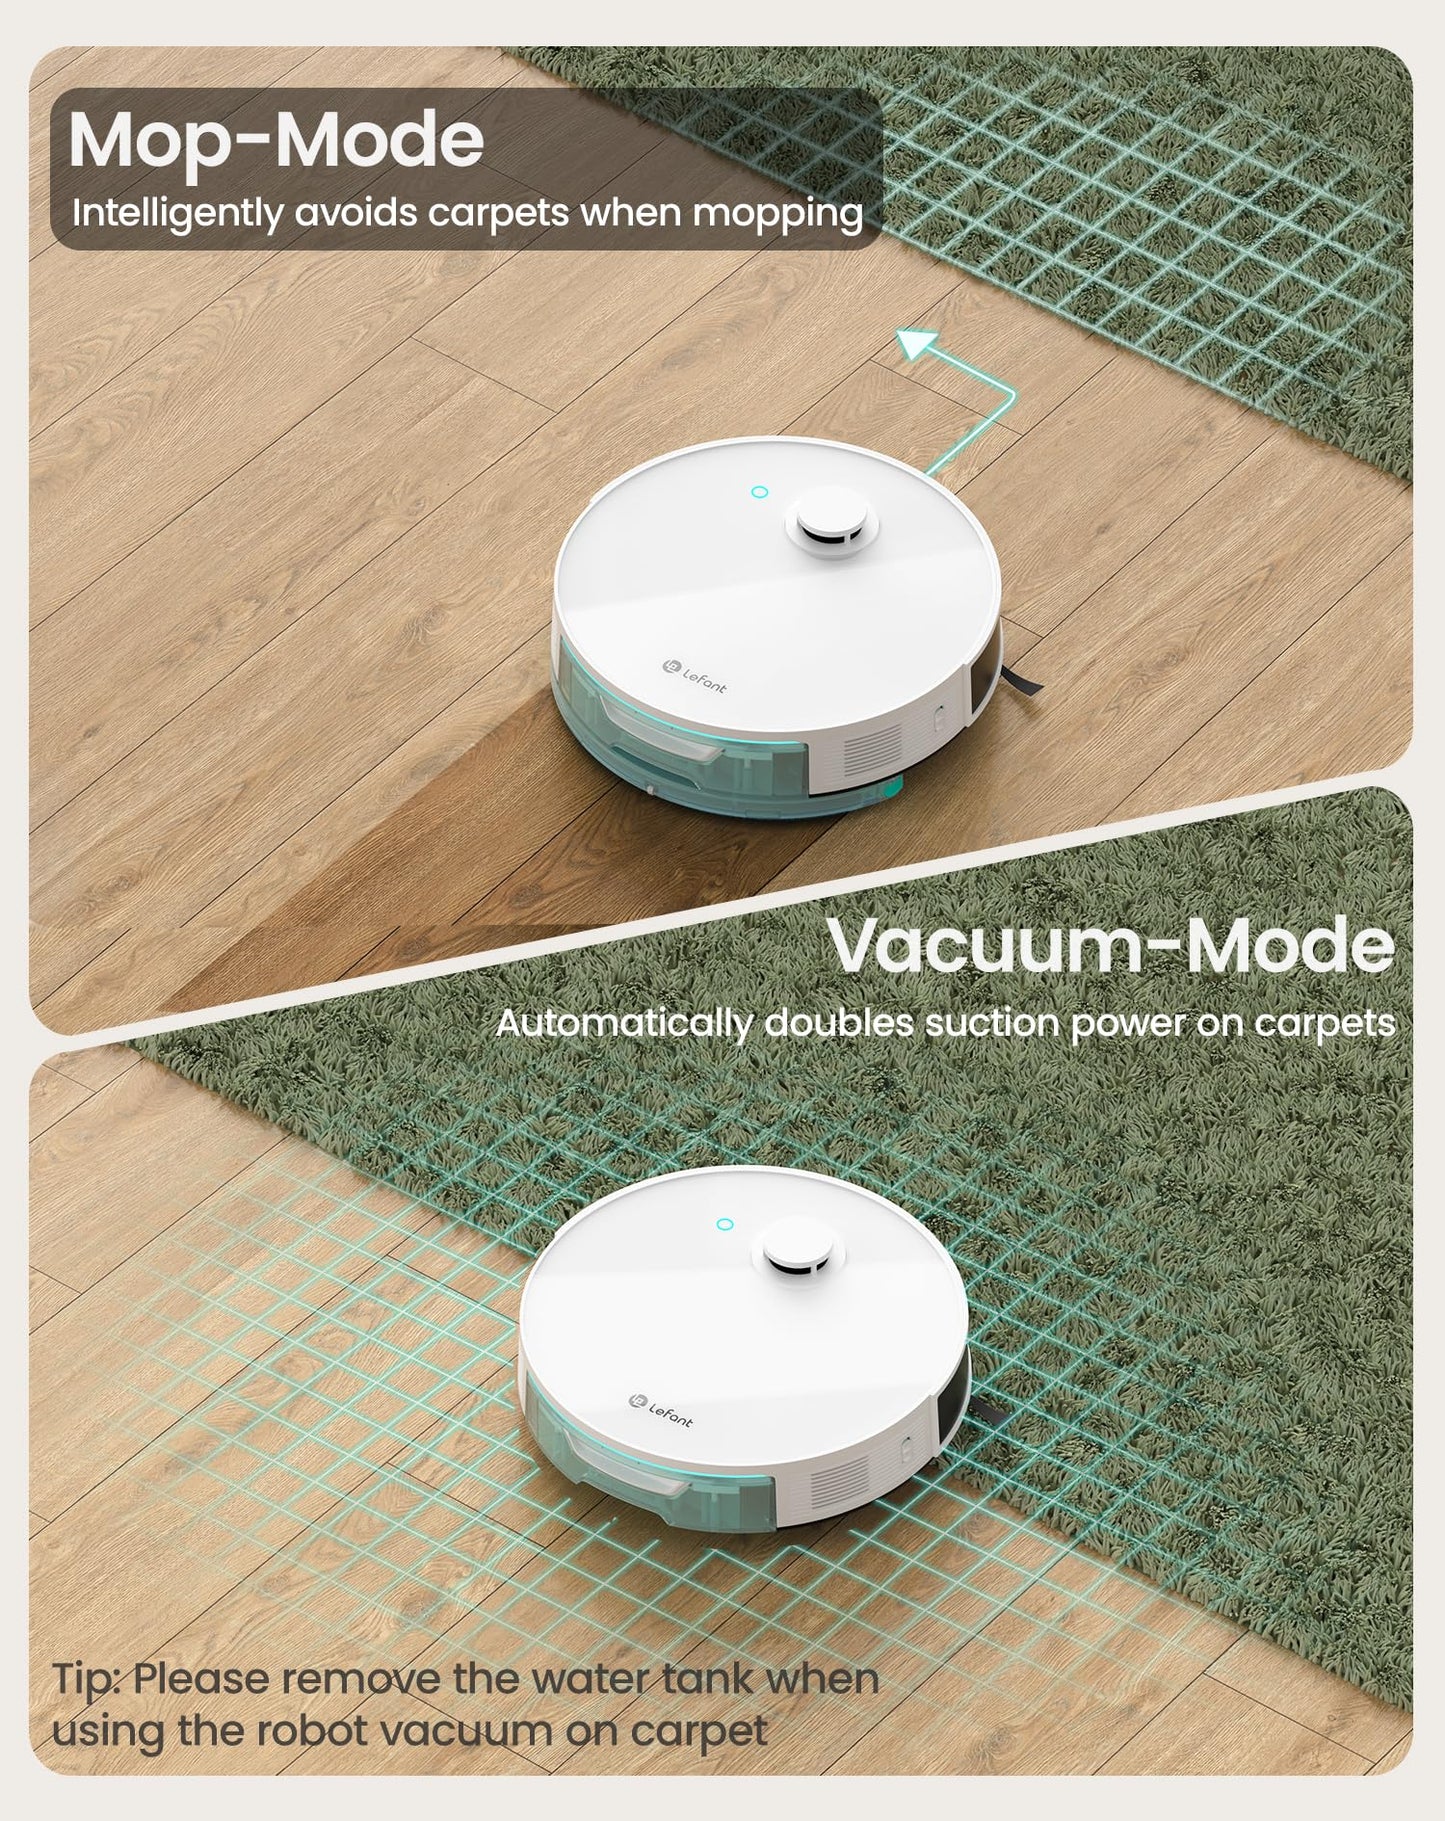 Lefant N3 Robot Vacuum and Mop Combo, Precision Mapping with Lidar & dToF Sensors, Max 4000Pa Suction, Ultrasonic Carpet Detection, Robotic Vacuum Cleaner with Sonic Mopping, WiFi/App/Alexa Control